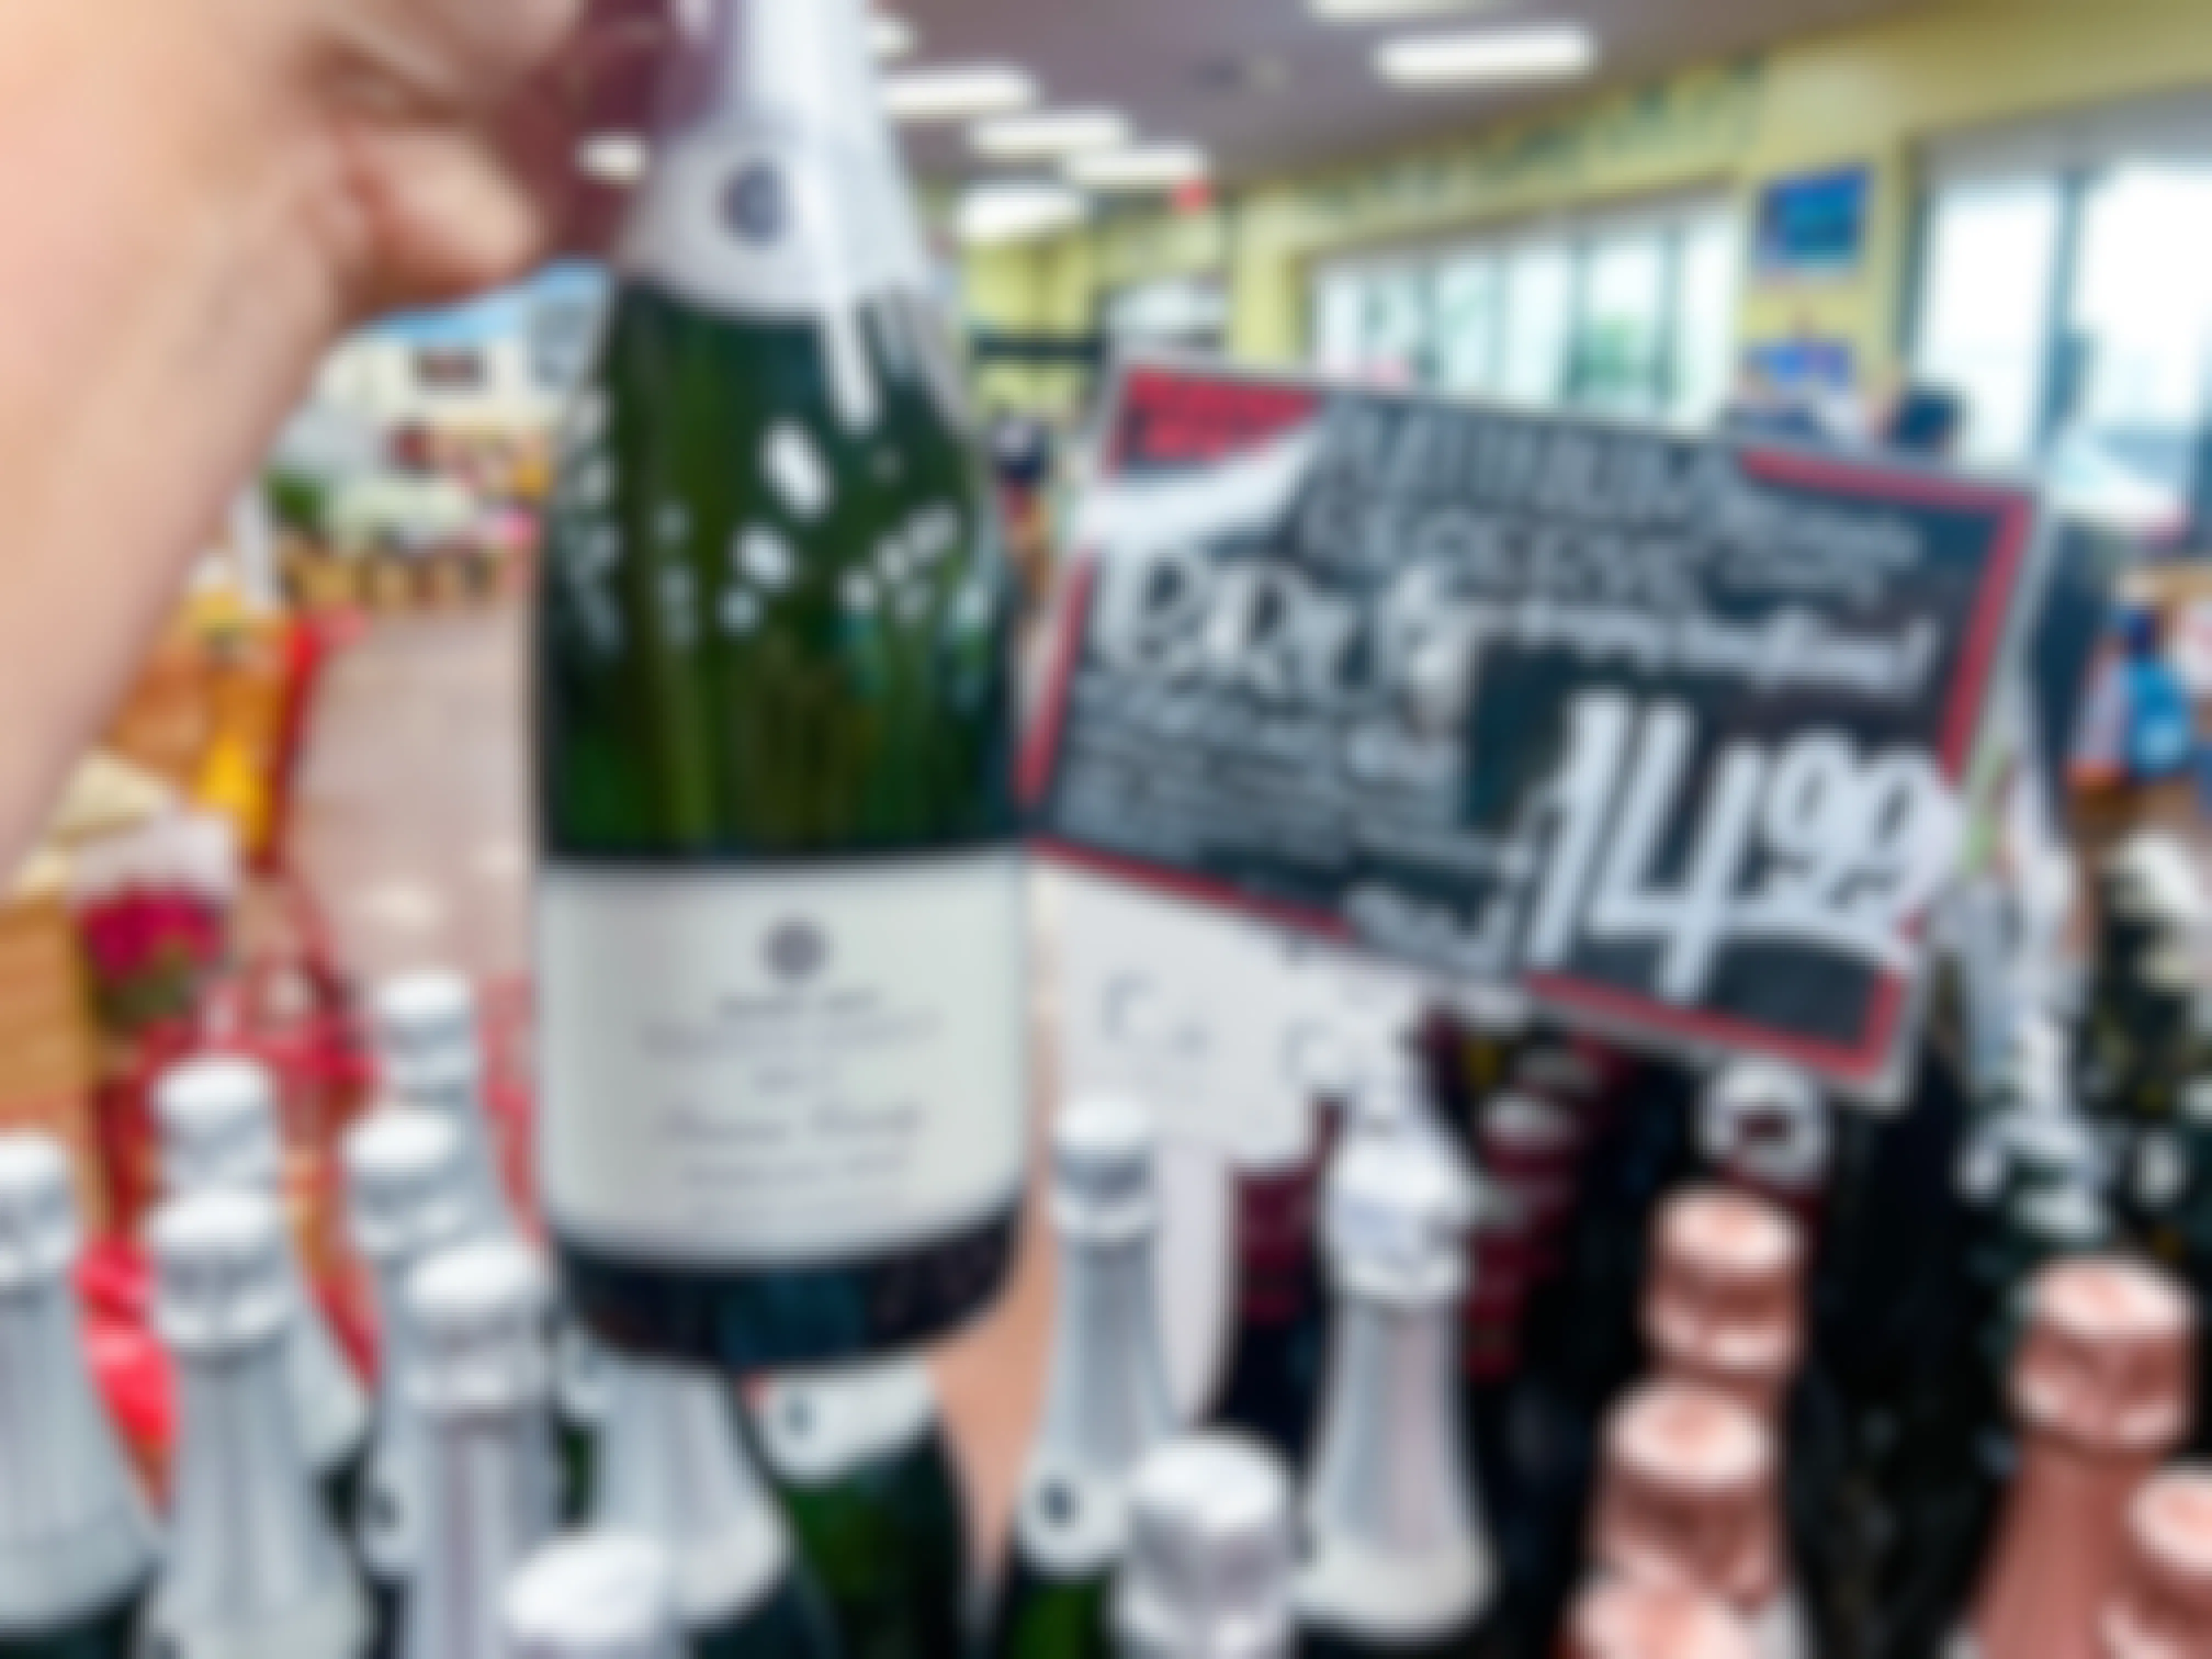 bottle of Trader Joe's Platinum Reserve Sonoma County Brut being held up in front of sign